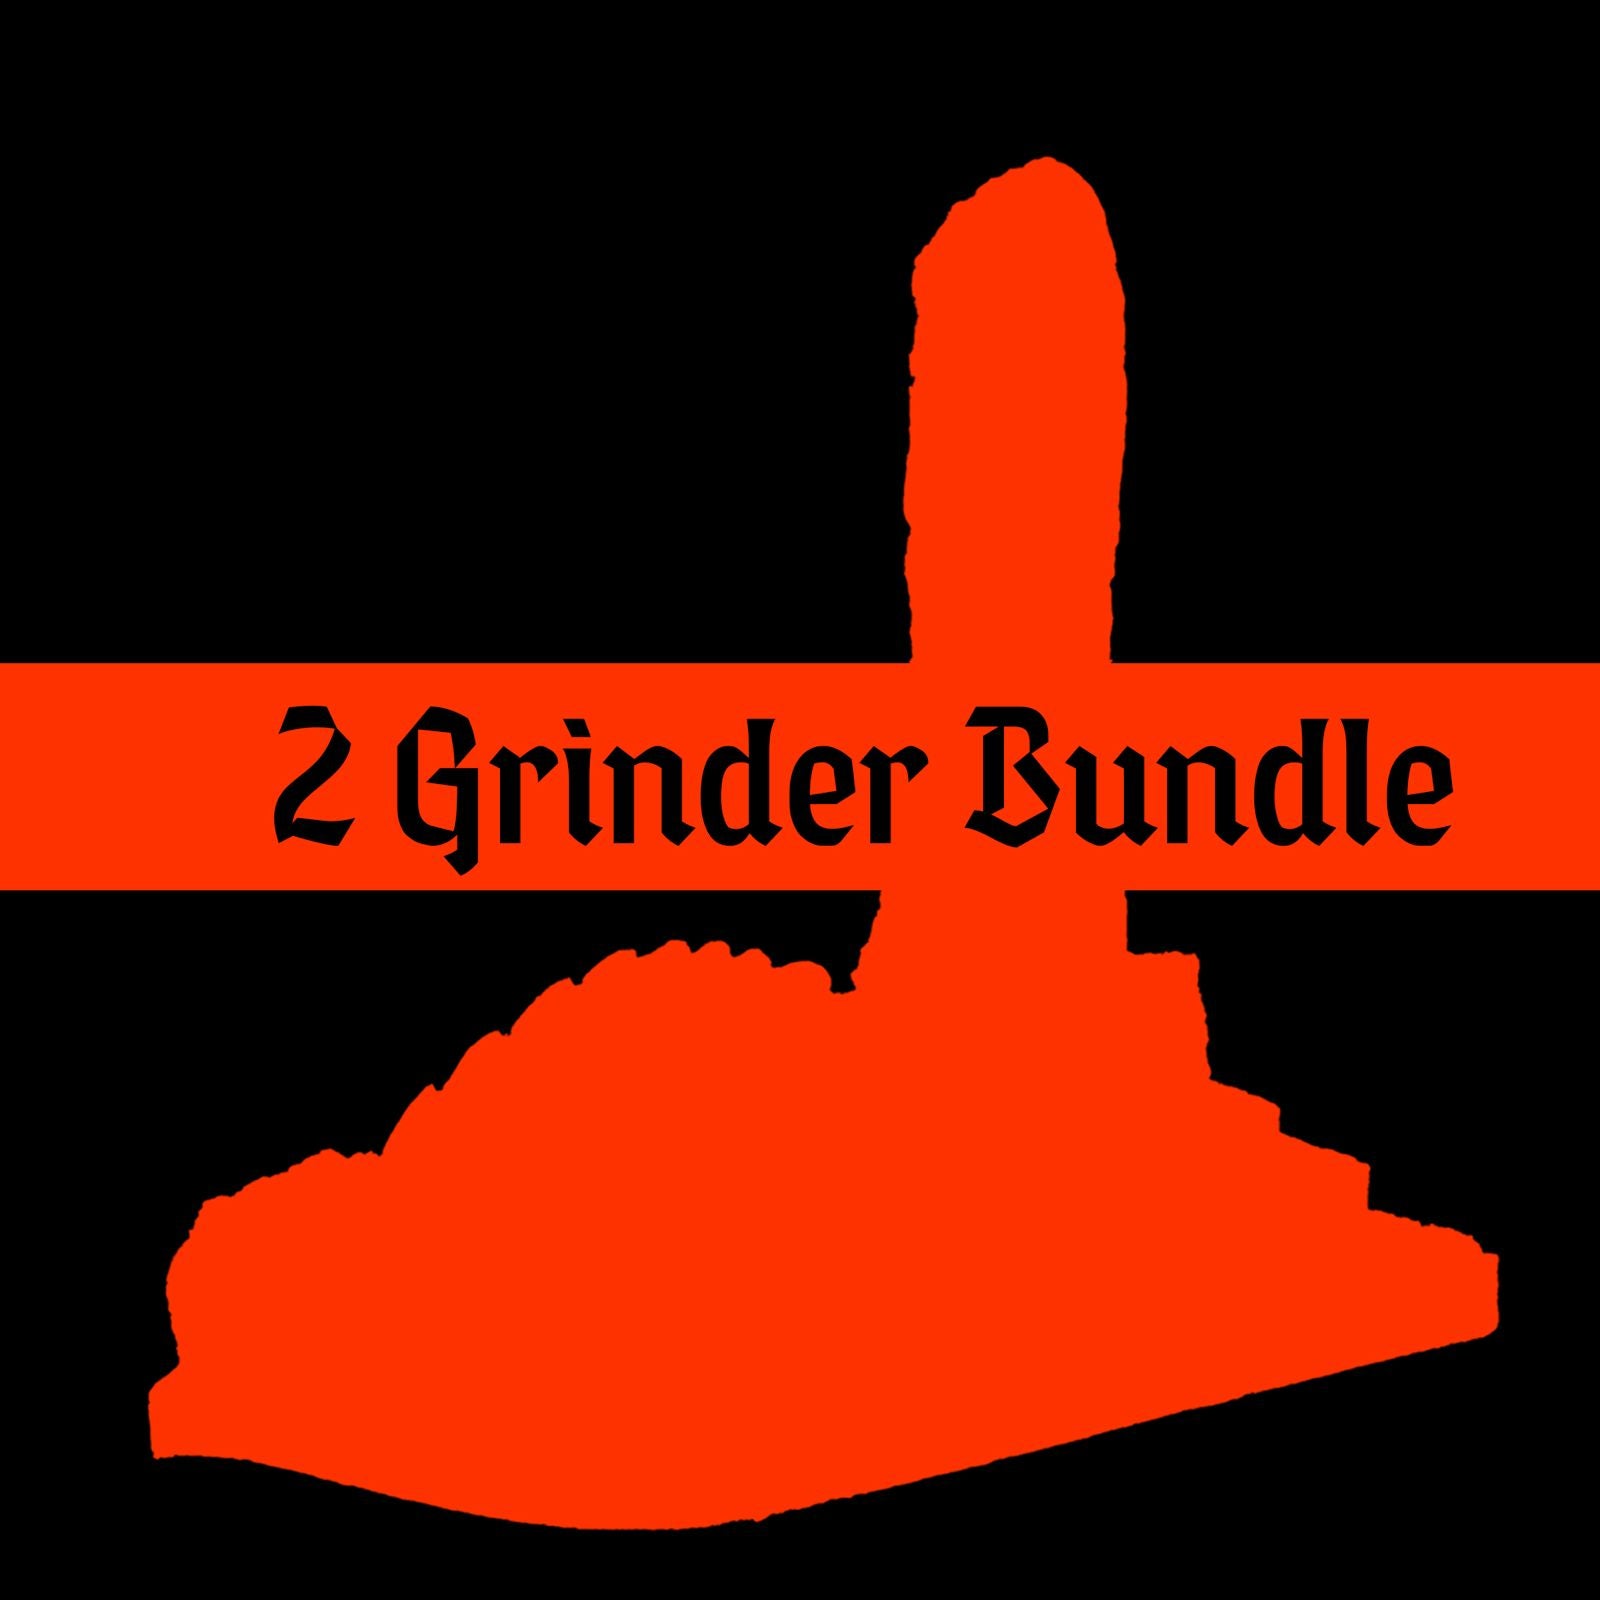 Fantasy Sex toy bundle discounted sale offer 